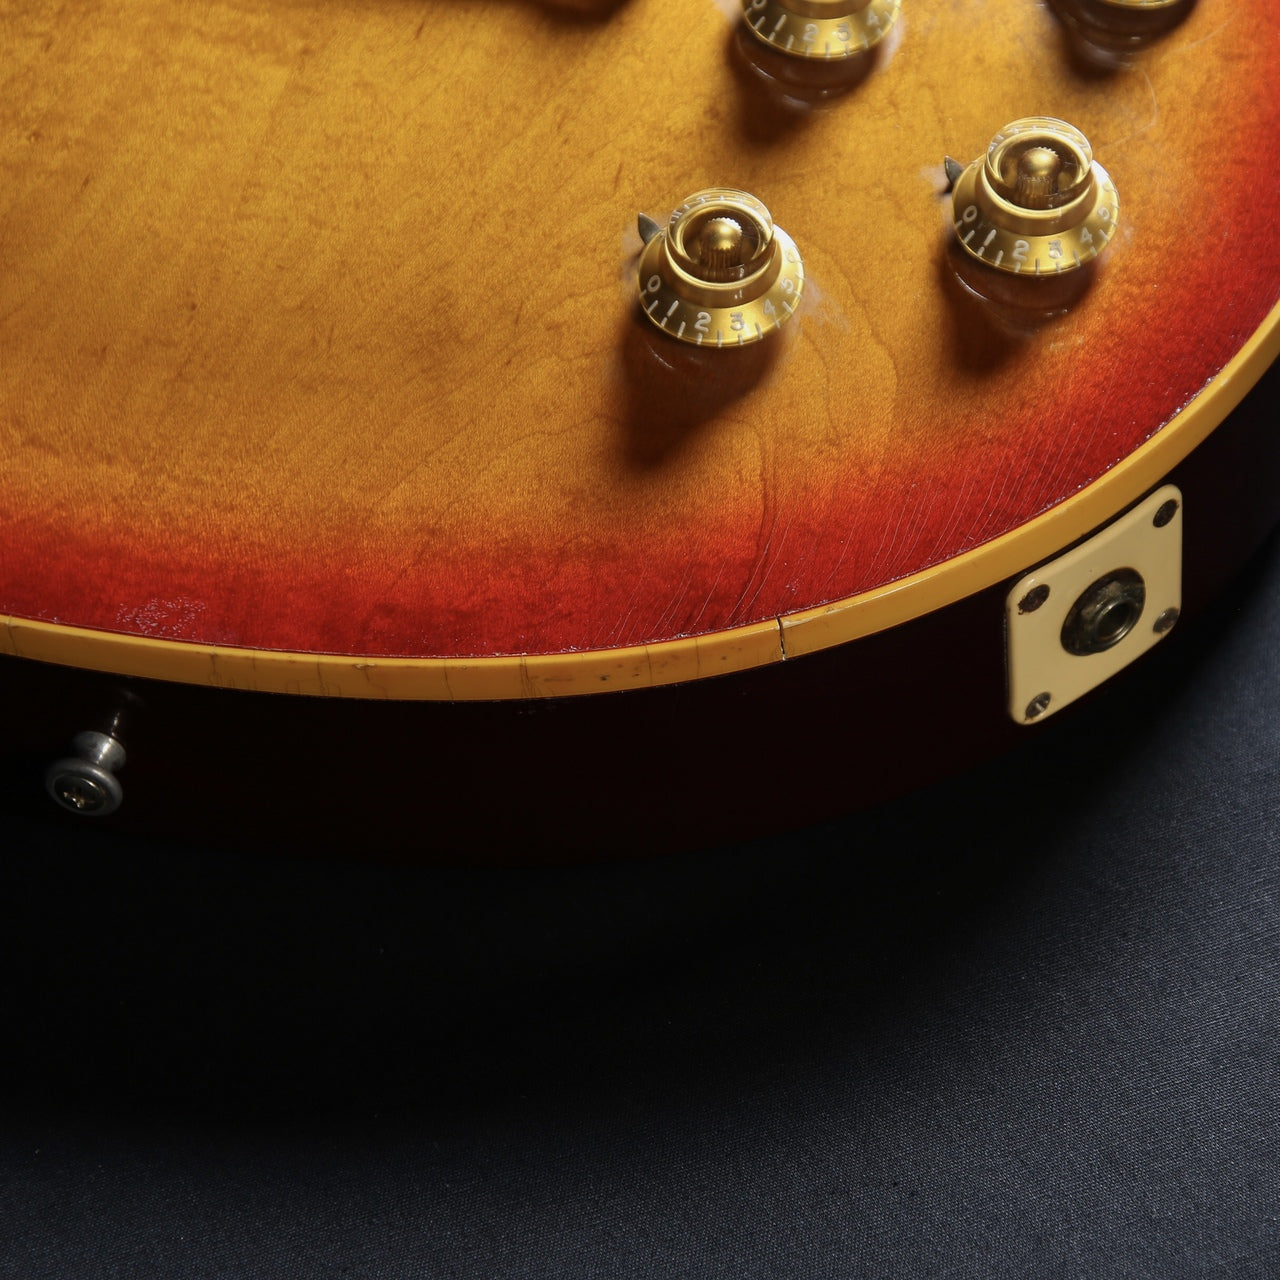 Gibson Les Paul Classic 1996 "Bethnal Green PAF"